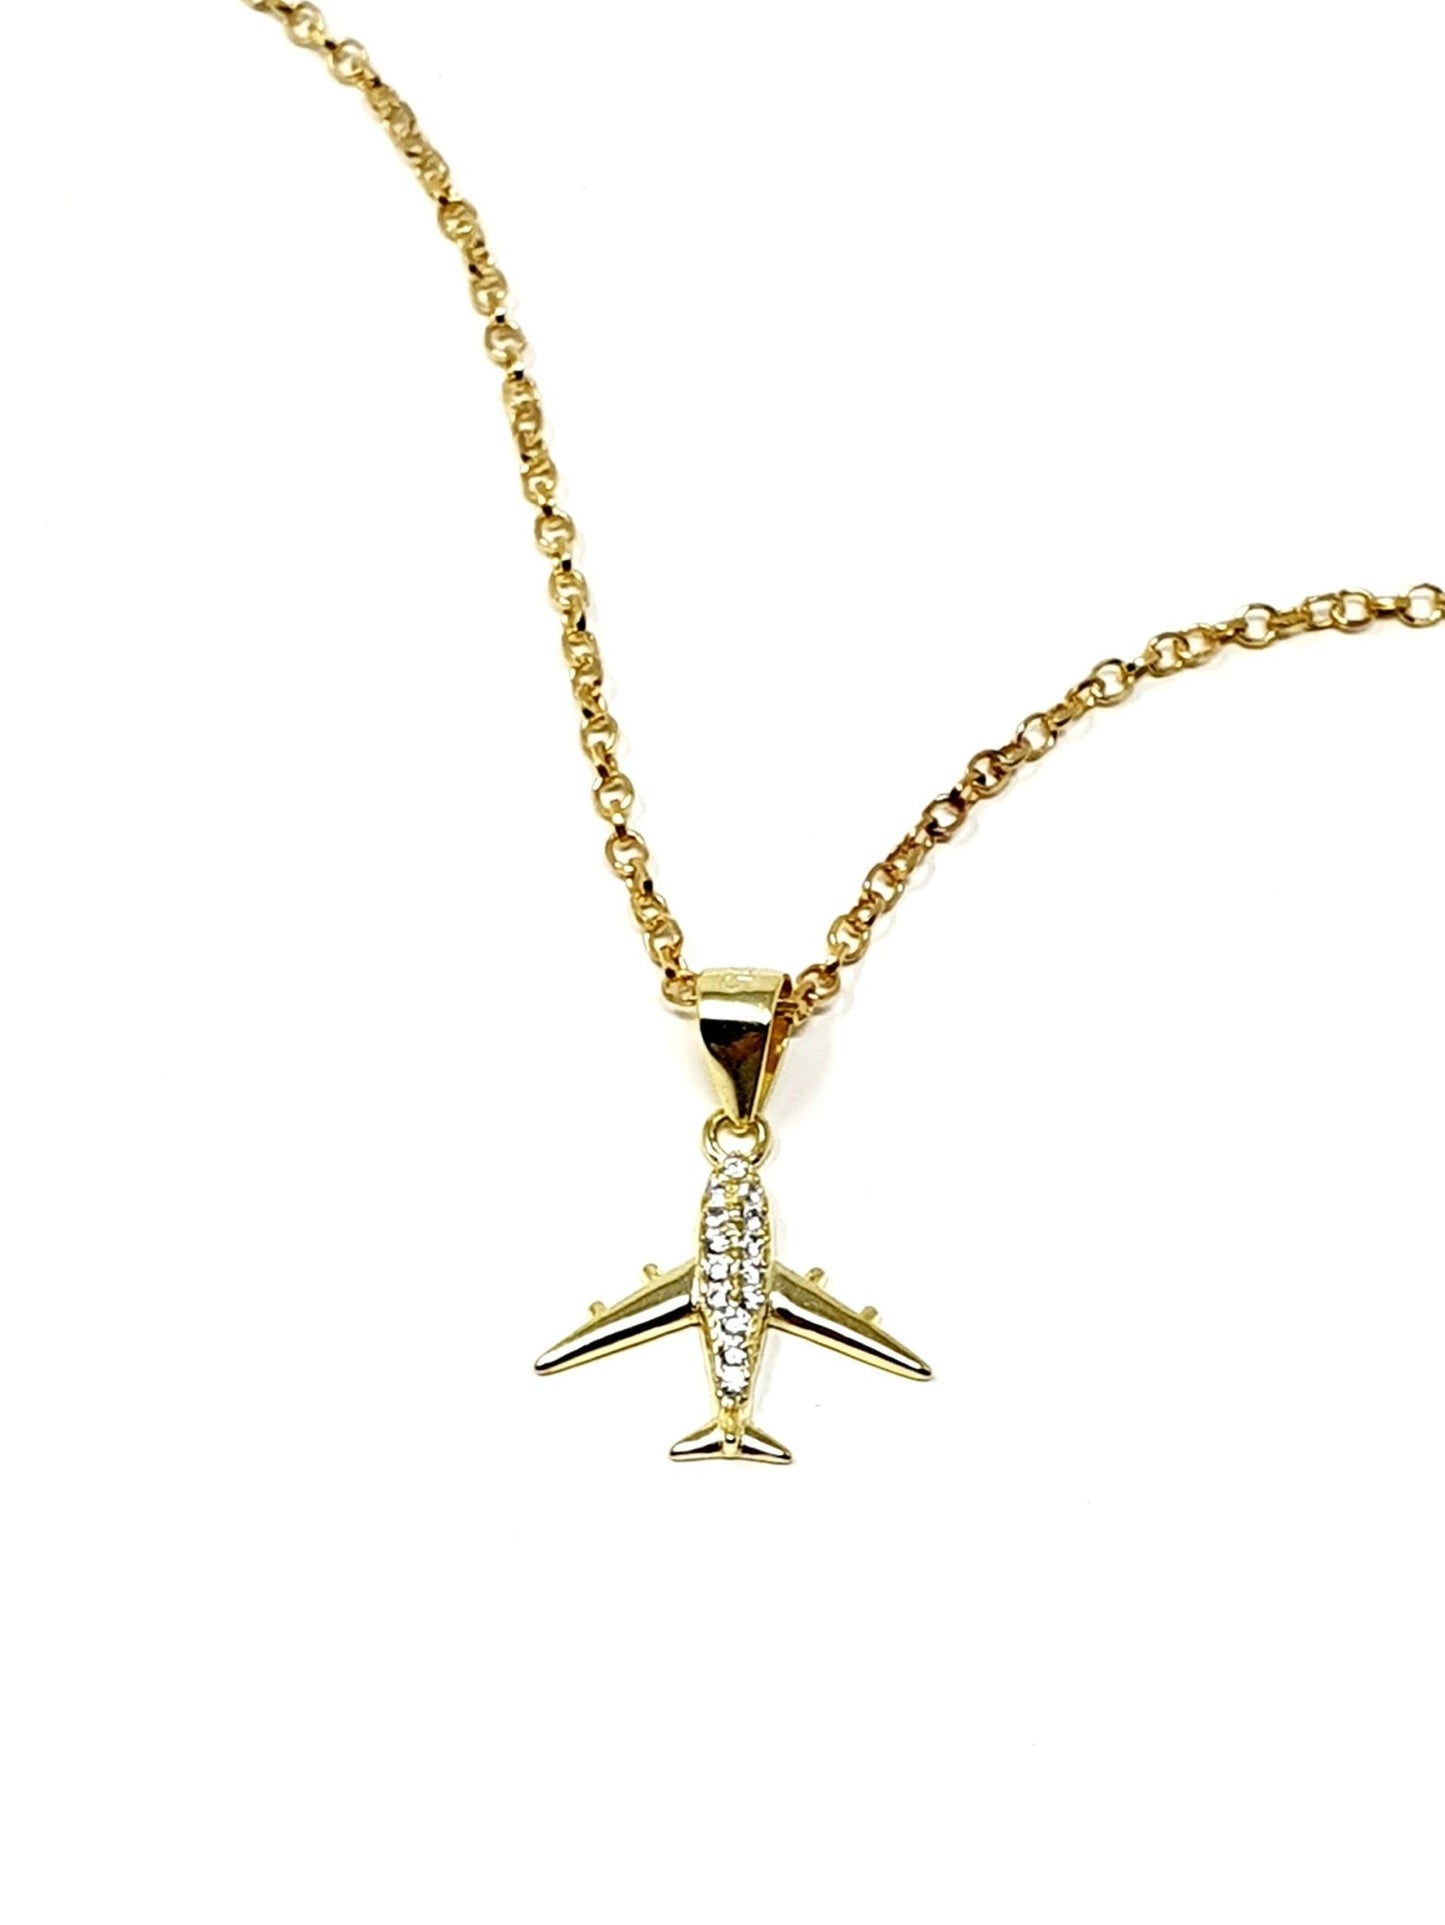 ARGENTO 925 PLACCATO IN ORO 18 Kt - Collana "I Love to Fly" - 333HOPE333